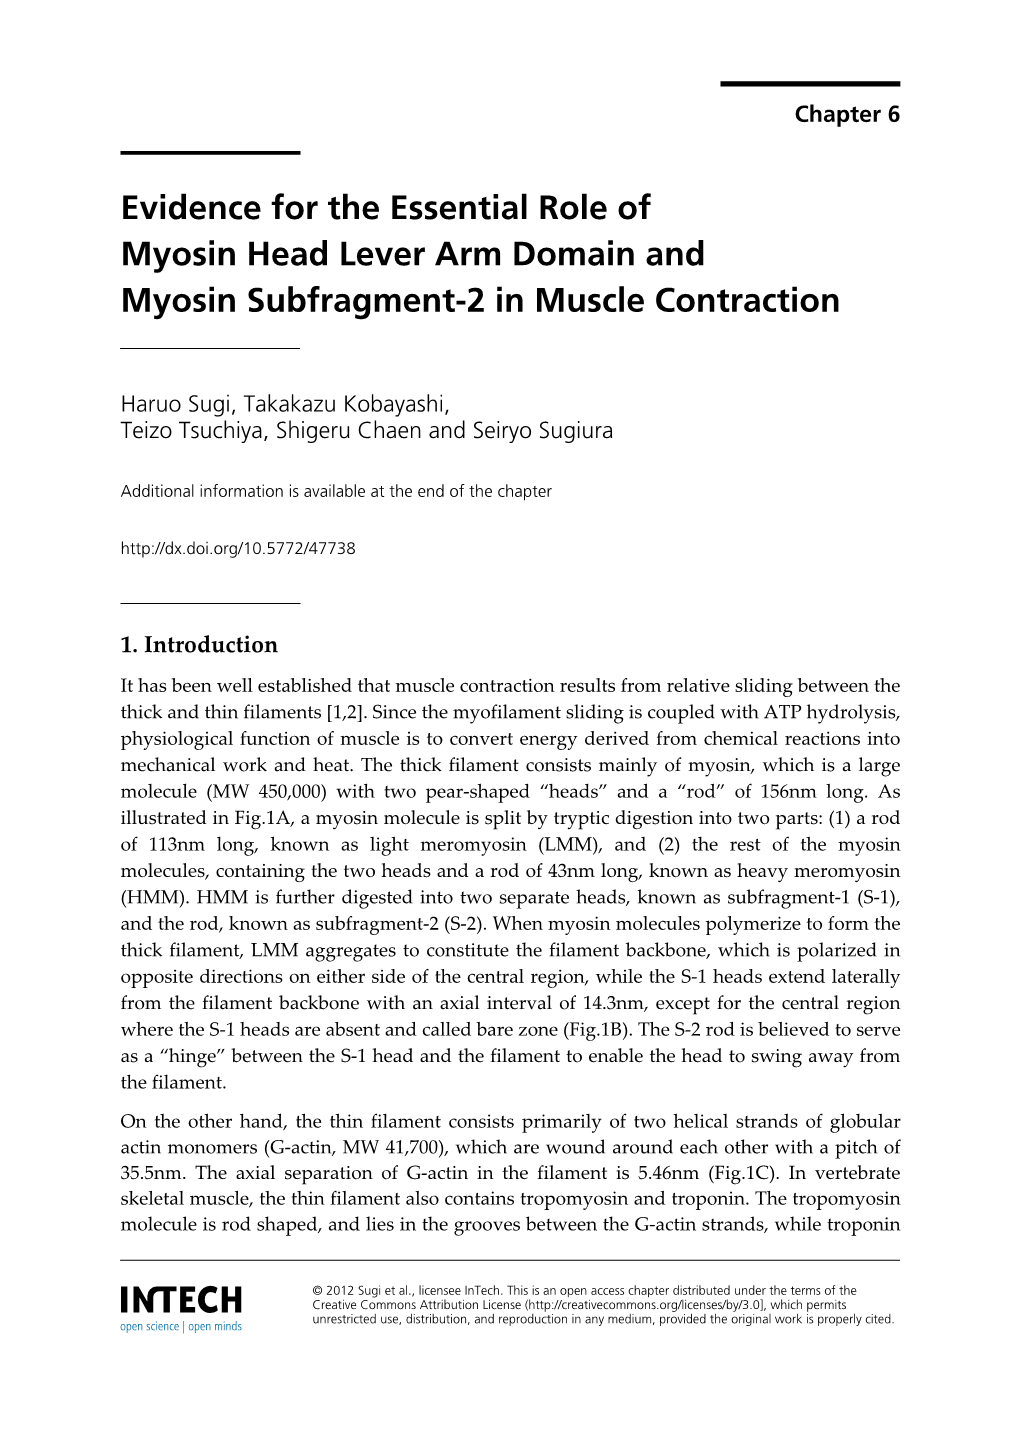 Evidence for the Essential Role of Myosin Head Lever Arm Domain and Myosin Subfragment-2 in Muscle Contraction